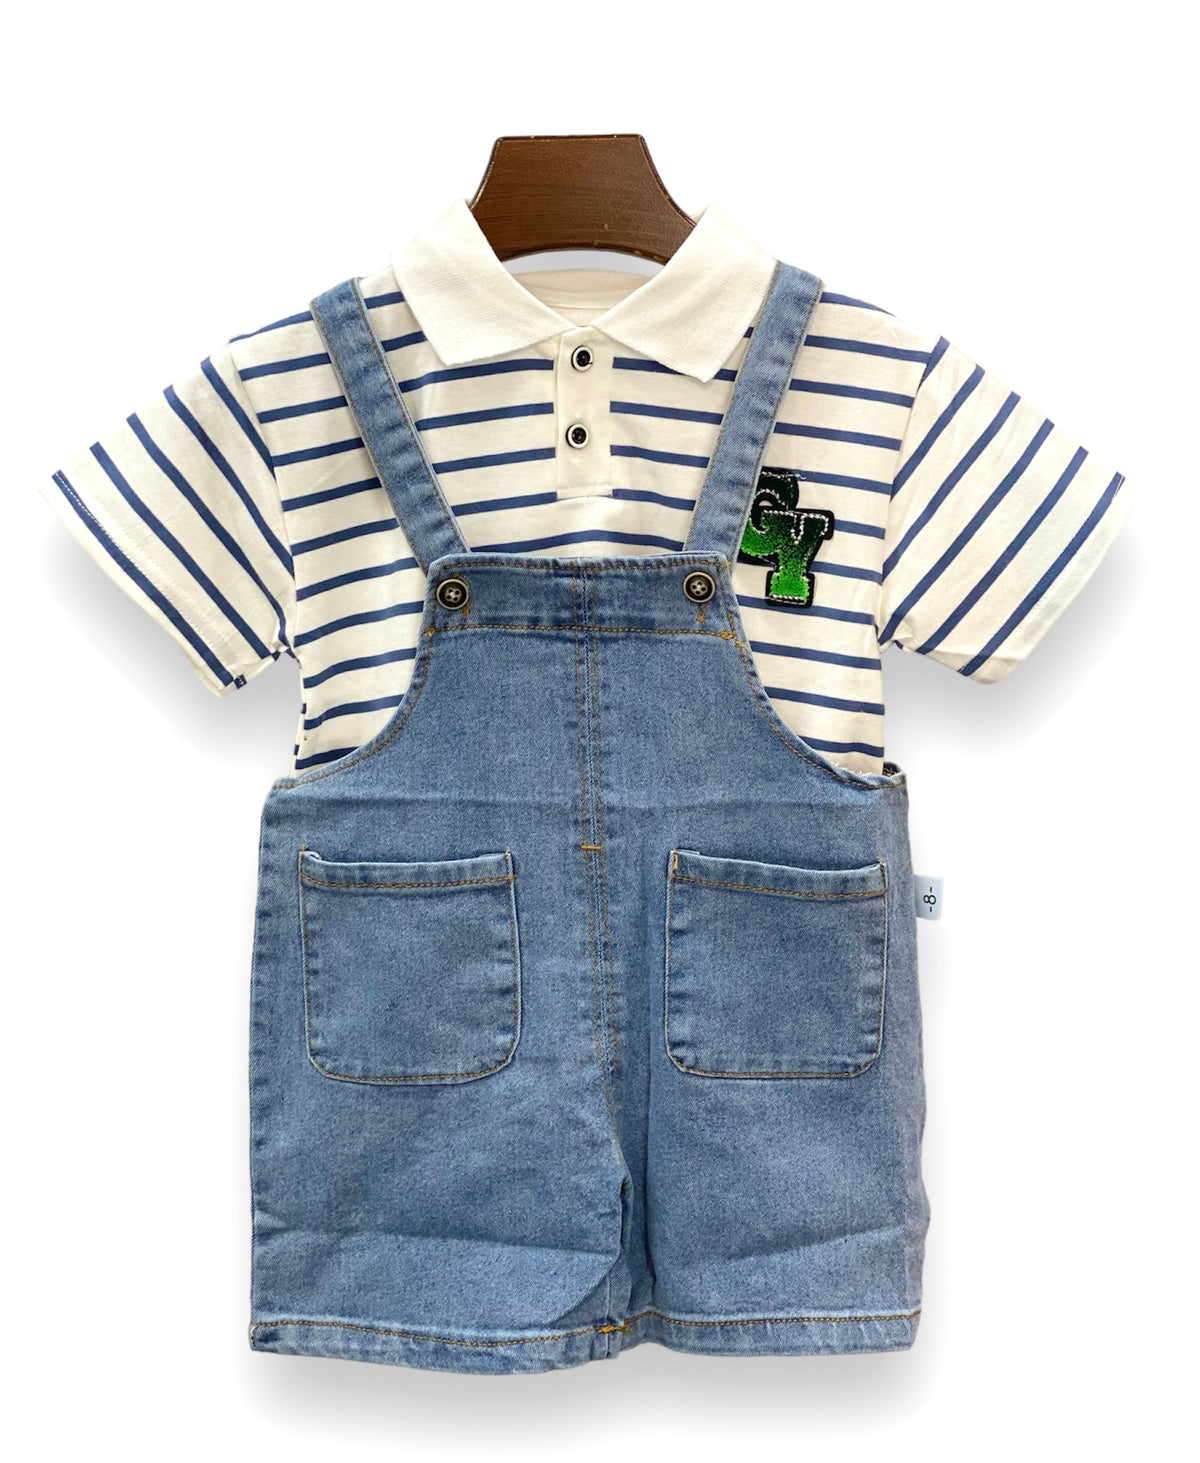 2PC Baby Boy Dungaree Suit